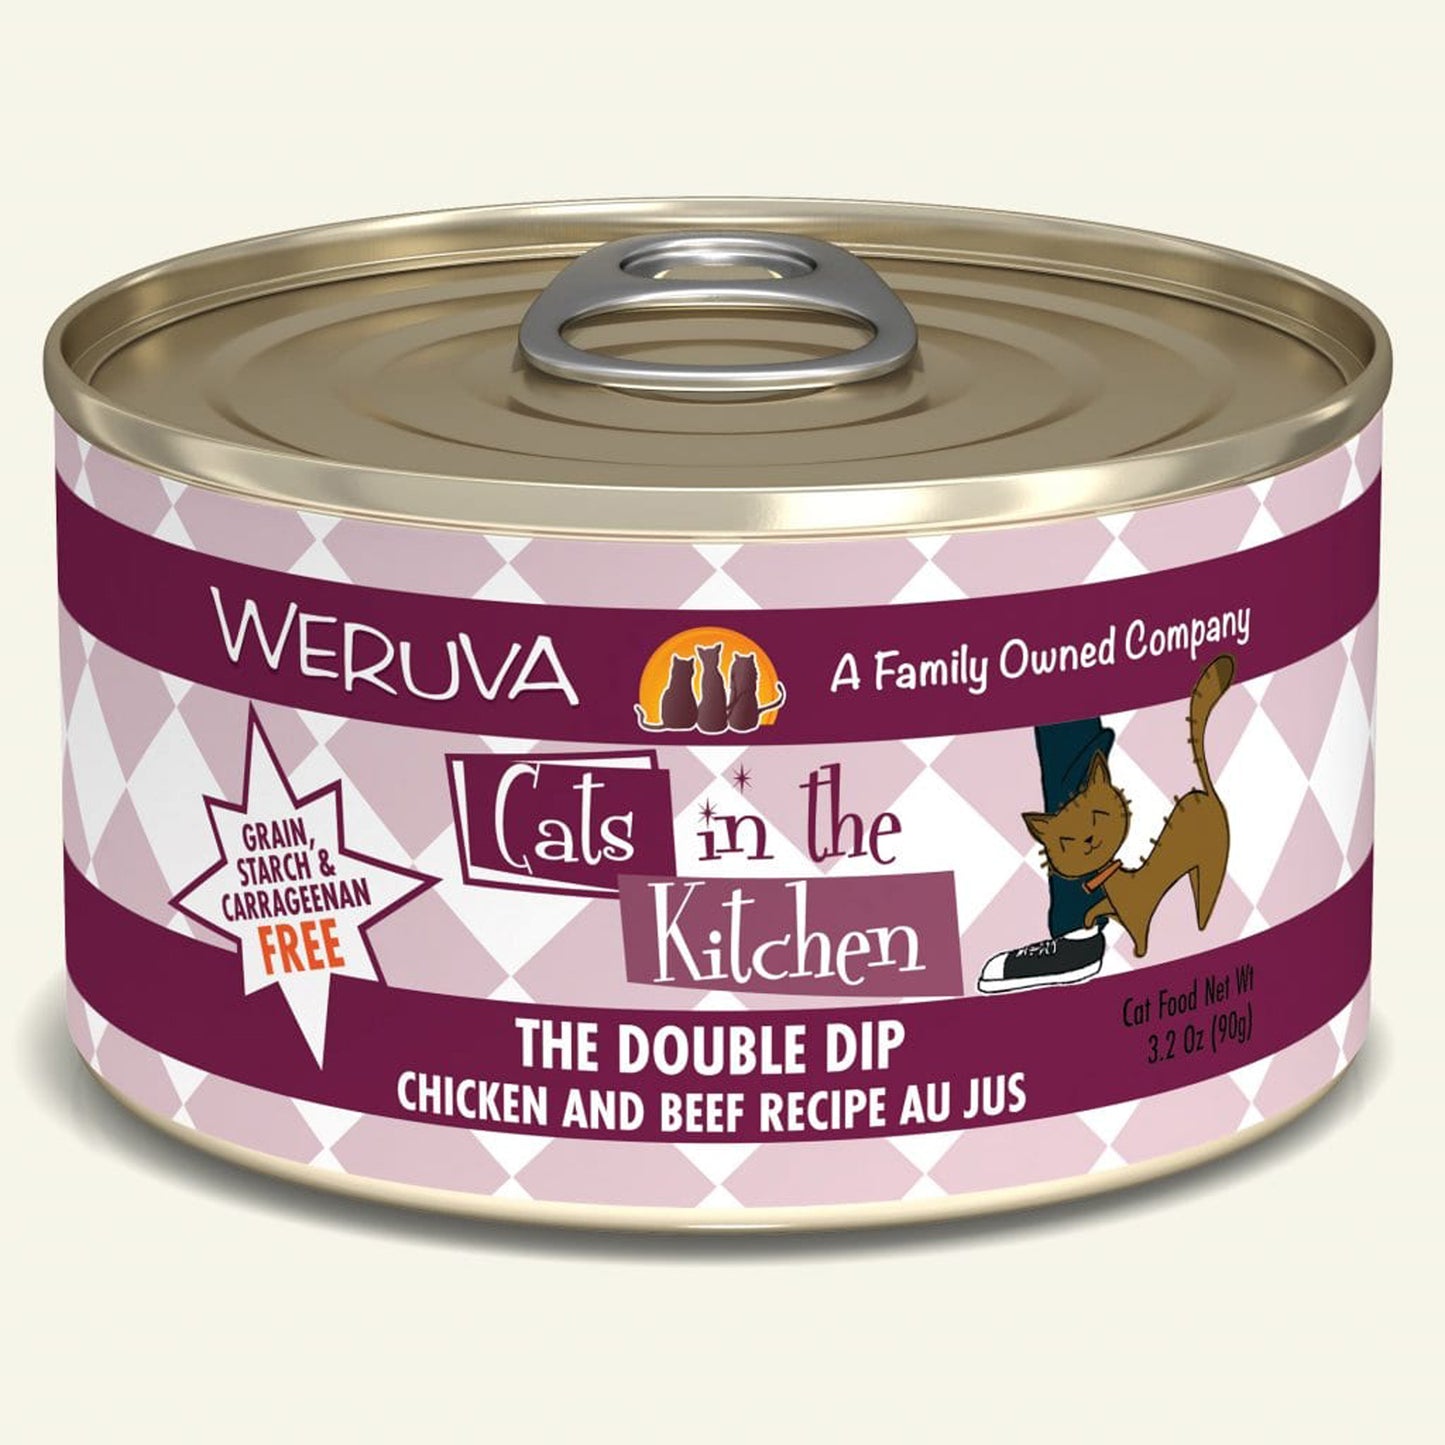 Cats In The Kitchen The Double Dip 6oz. Chicken and Beef Recipe (Case Of 24)